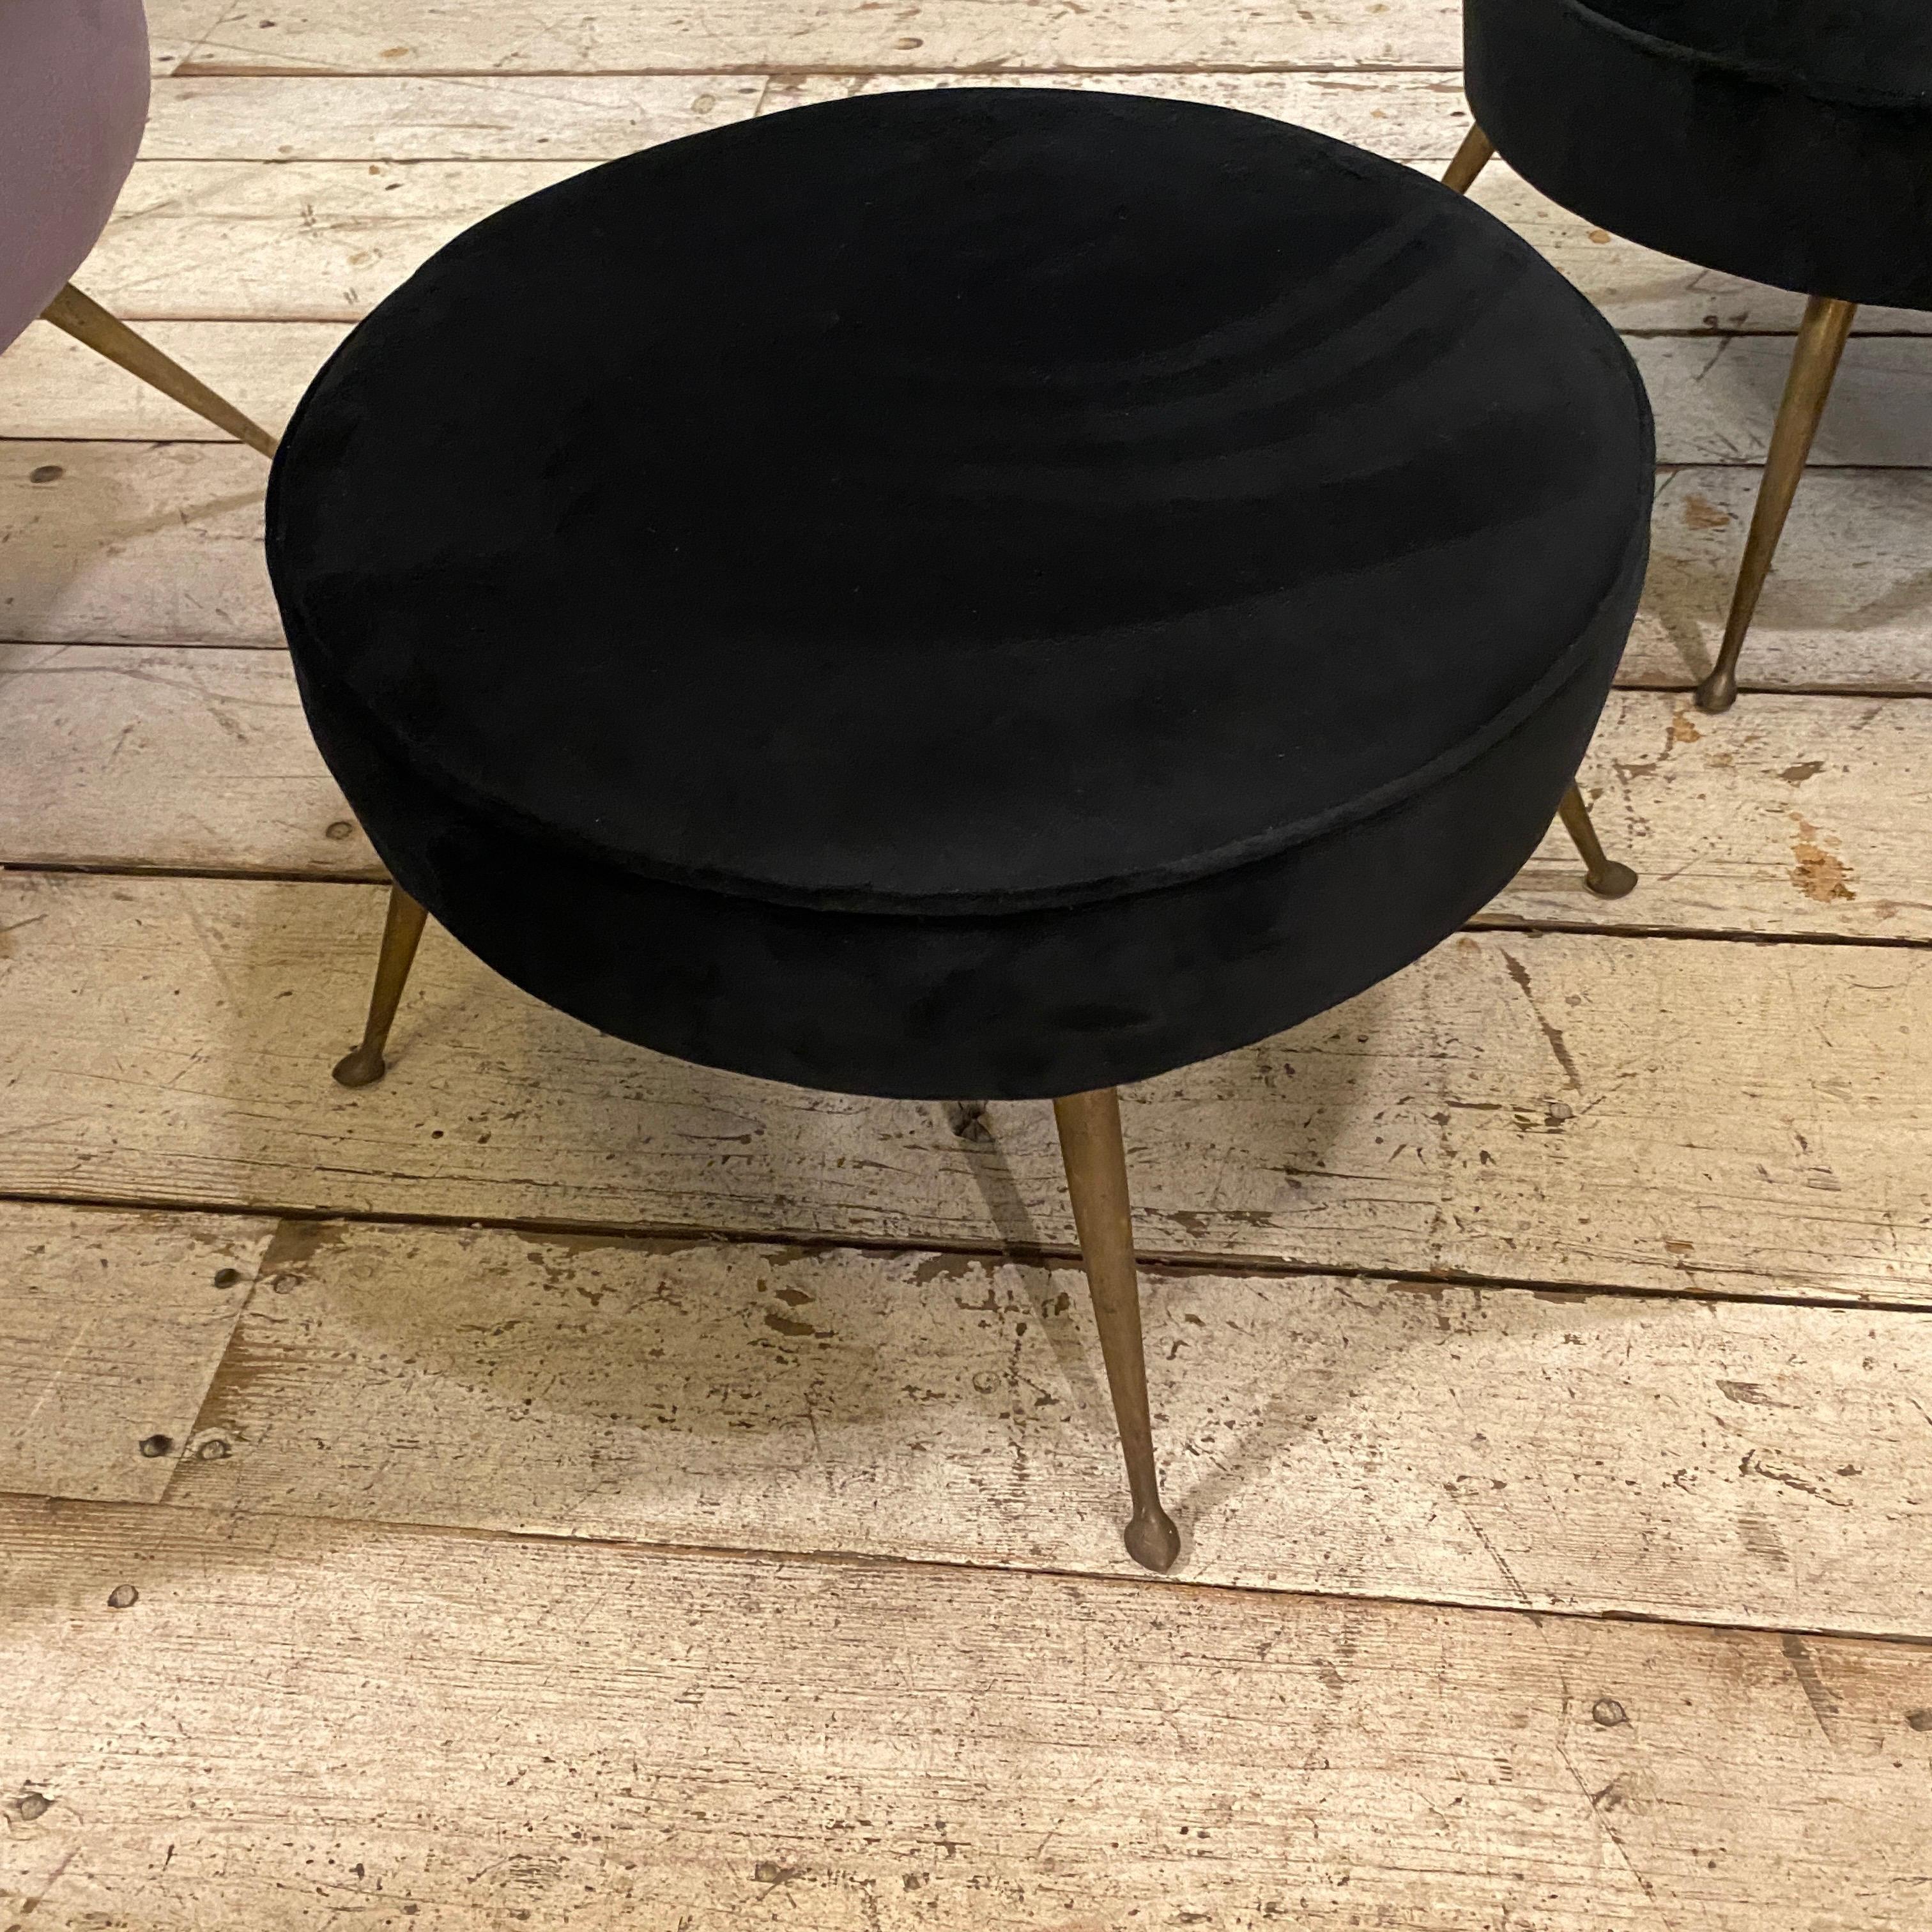 Two round poufs made in Italy in the Fifties, black velvet has been recently upholstered, brass it's in original patina.